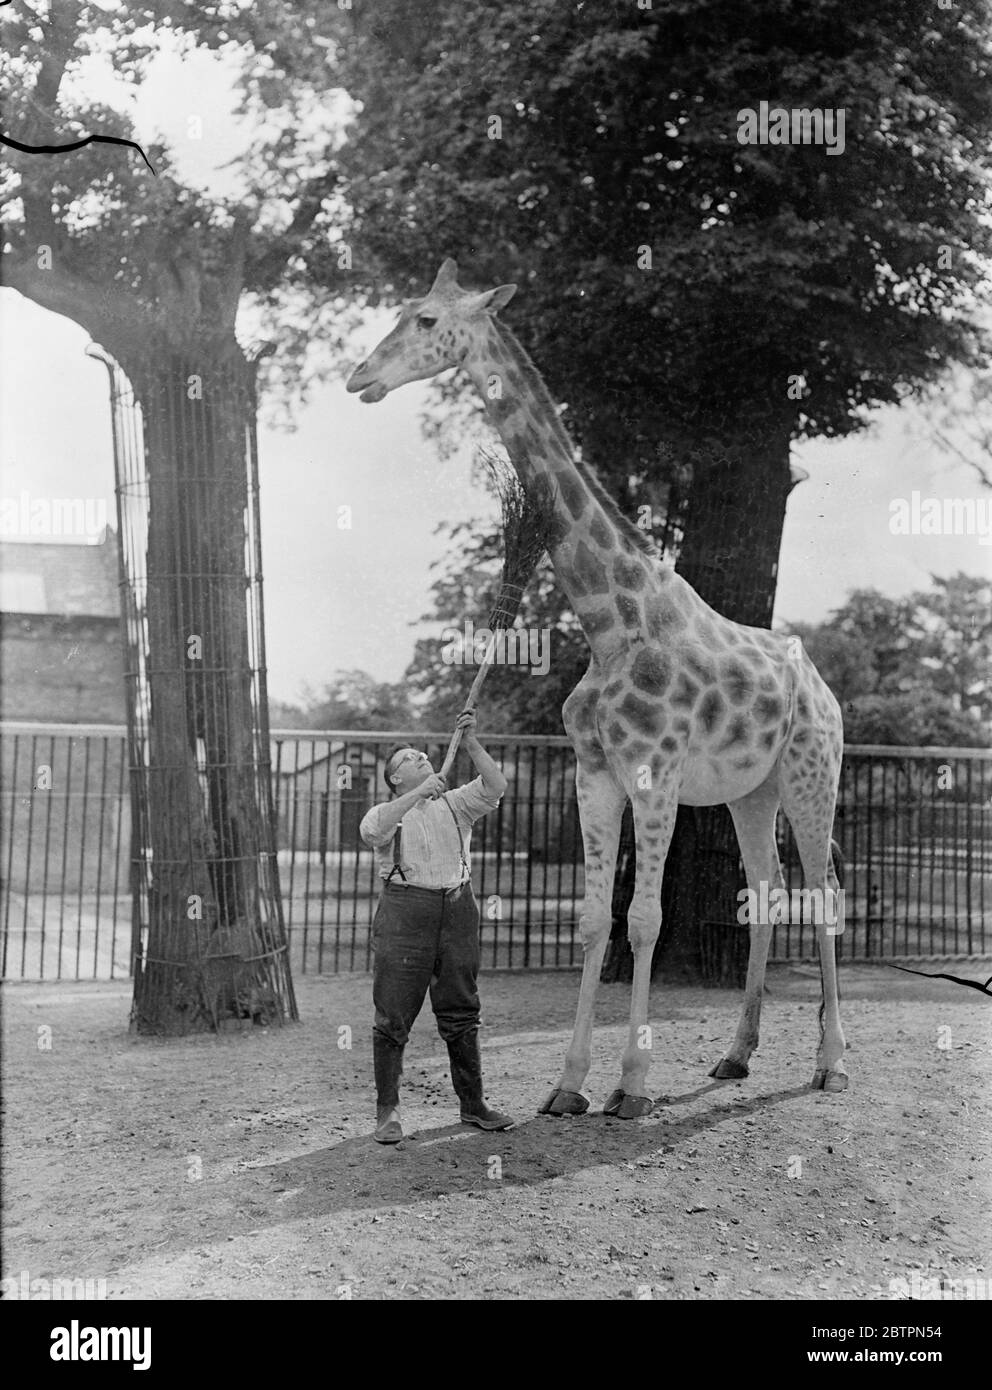 Getting in the neck. London zoo giraffe submitting with resignation to having its neck brushed by keeper with a long handled broom. 4 June 1937 Stock Photo